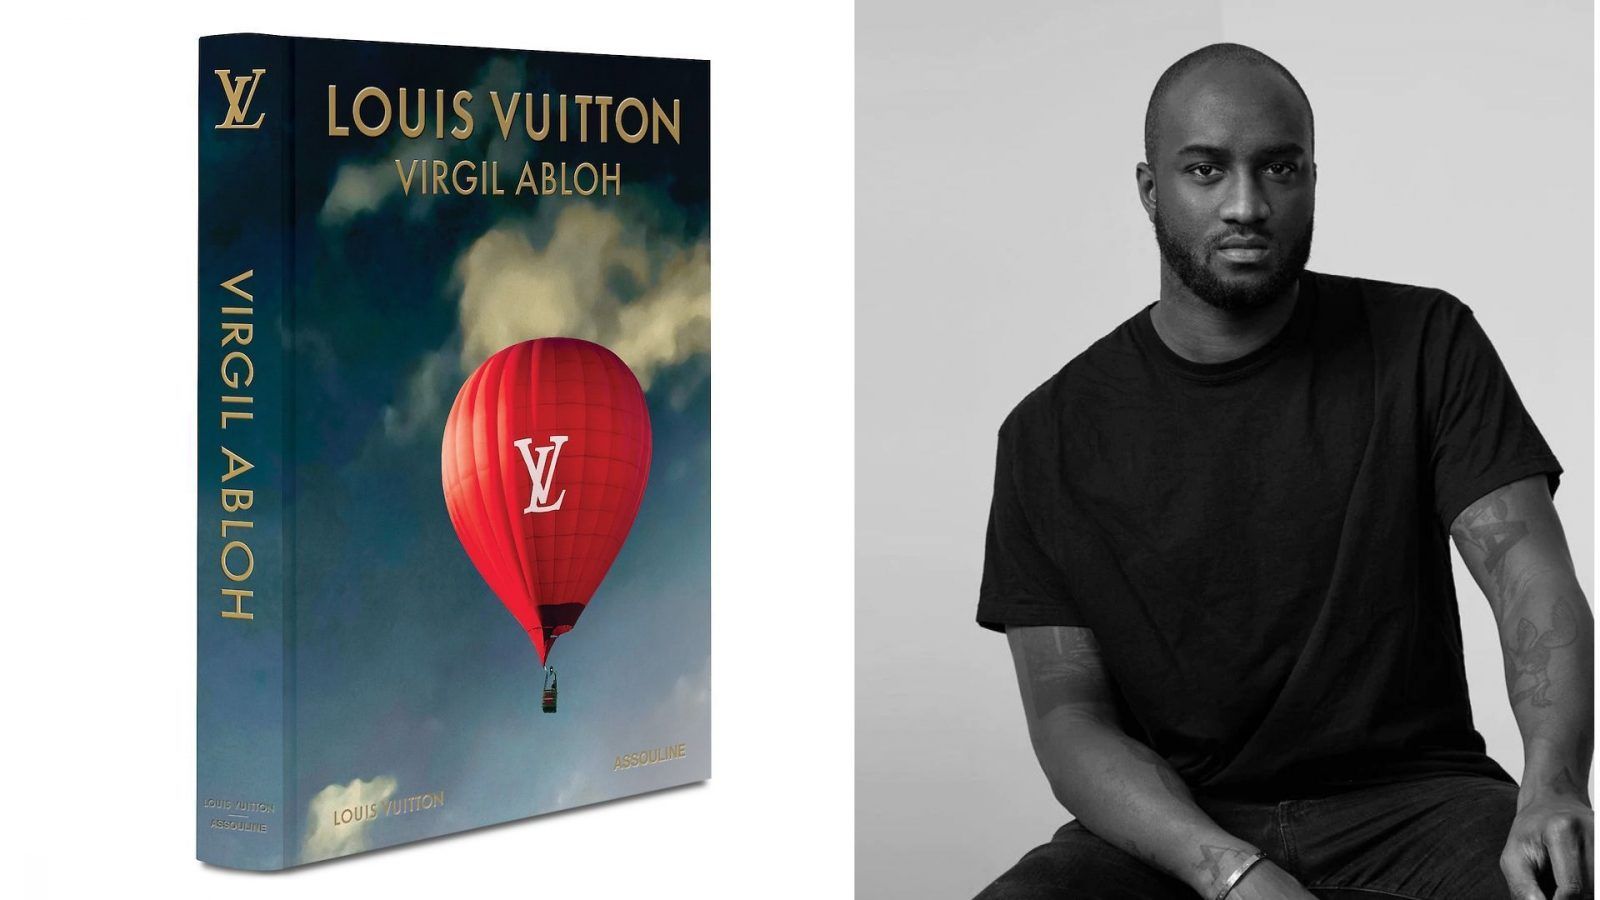 Louis Vuitton on X: Novel reinterpretations. While reflecting the timeless  modernity of the Maison, @VirgilAbloh's passion for music also provides  inspiration for DJ Vivienne and the Trunk Speaker. Explore #LouisVuitton's  Art of